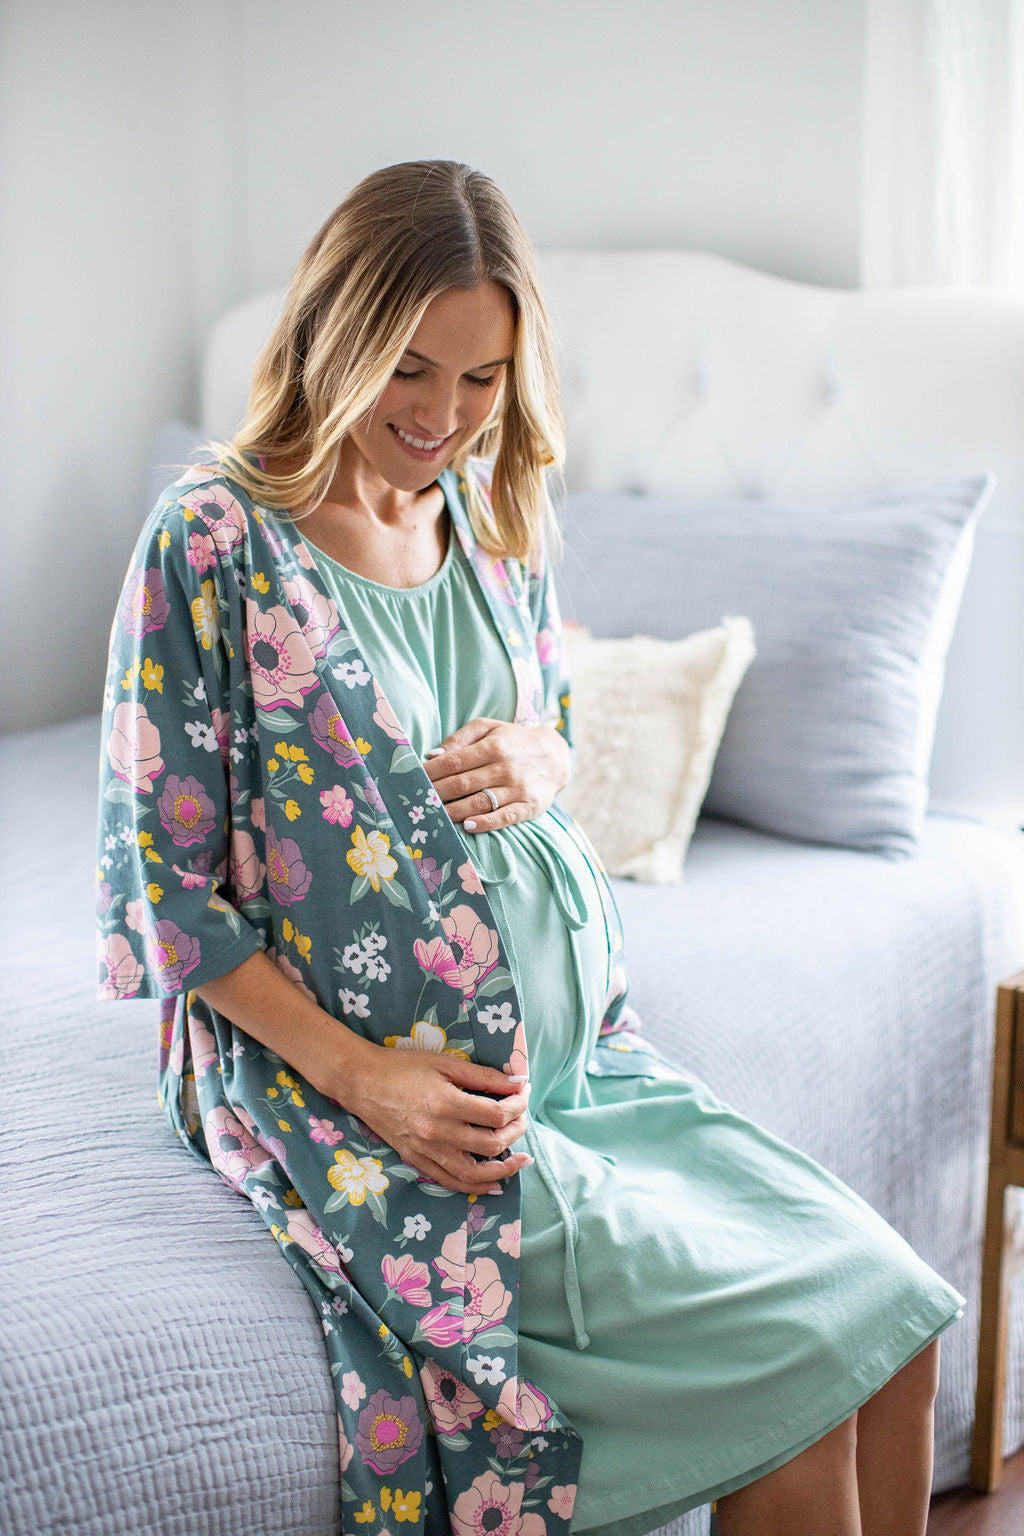 Charlotte maternity robe and Sage labor gown. Perfect outfit for labor and delivery. Pink, yellow, and white flowers against a deep green background with a Sage labor gown to coordinate.